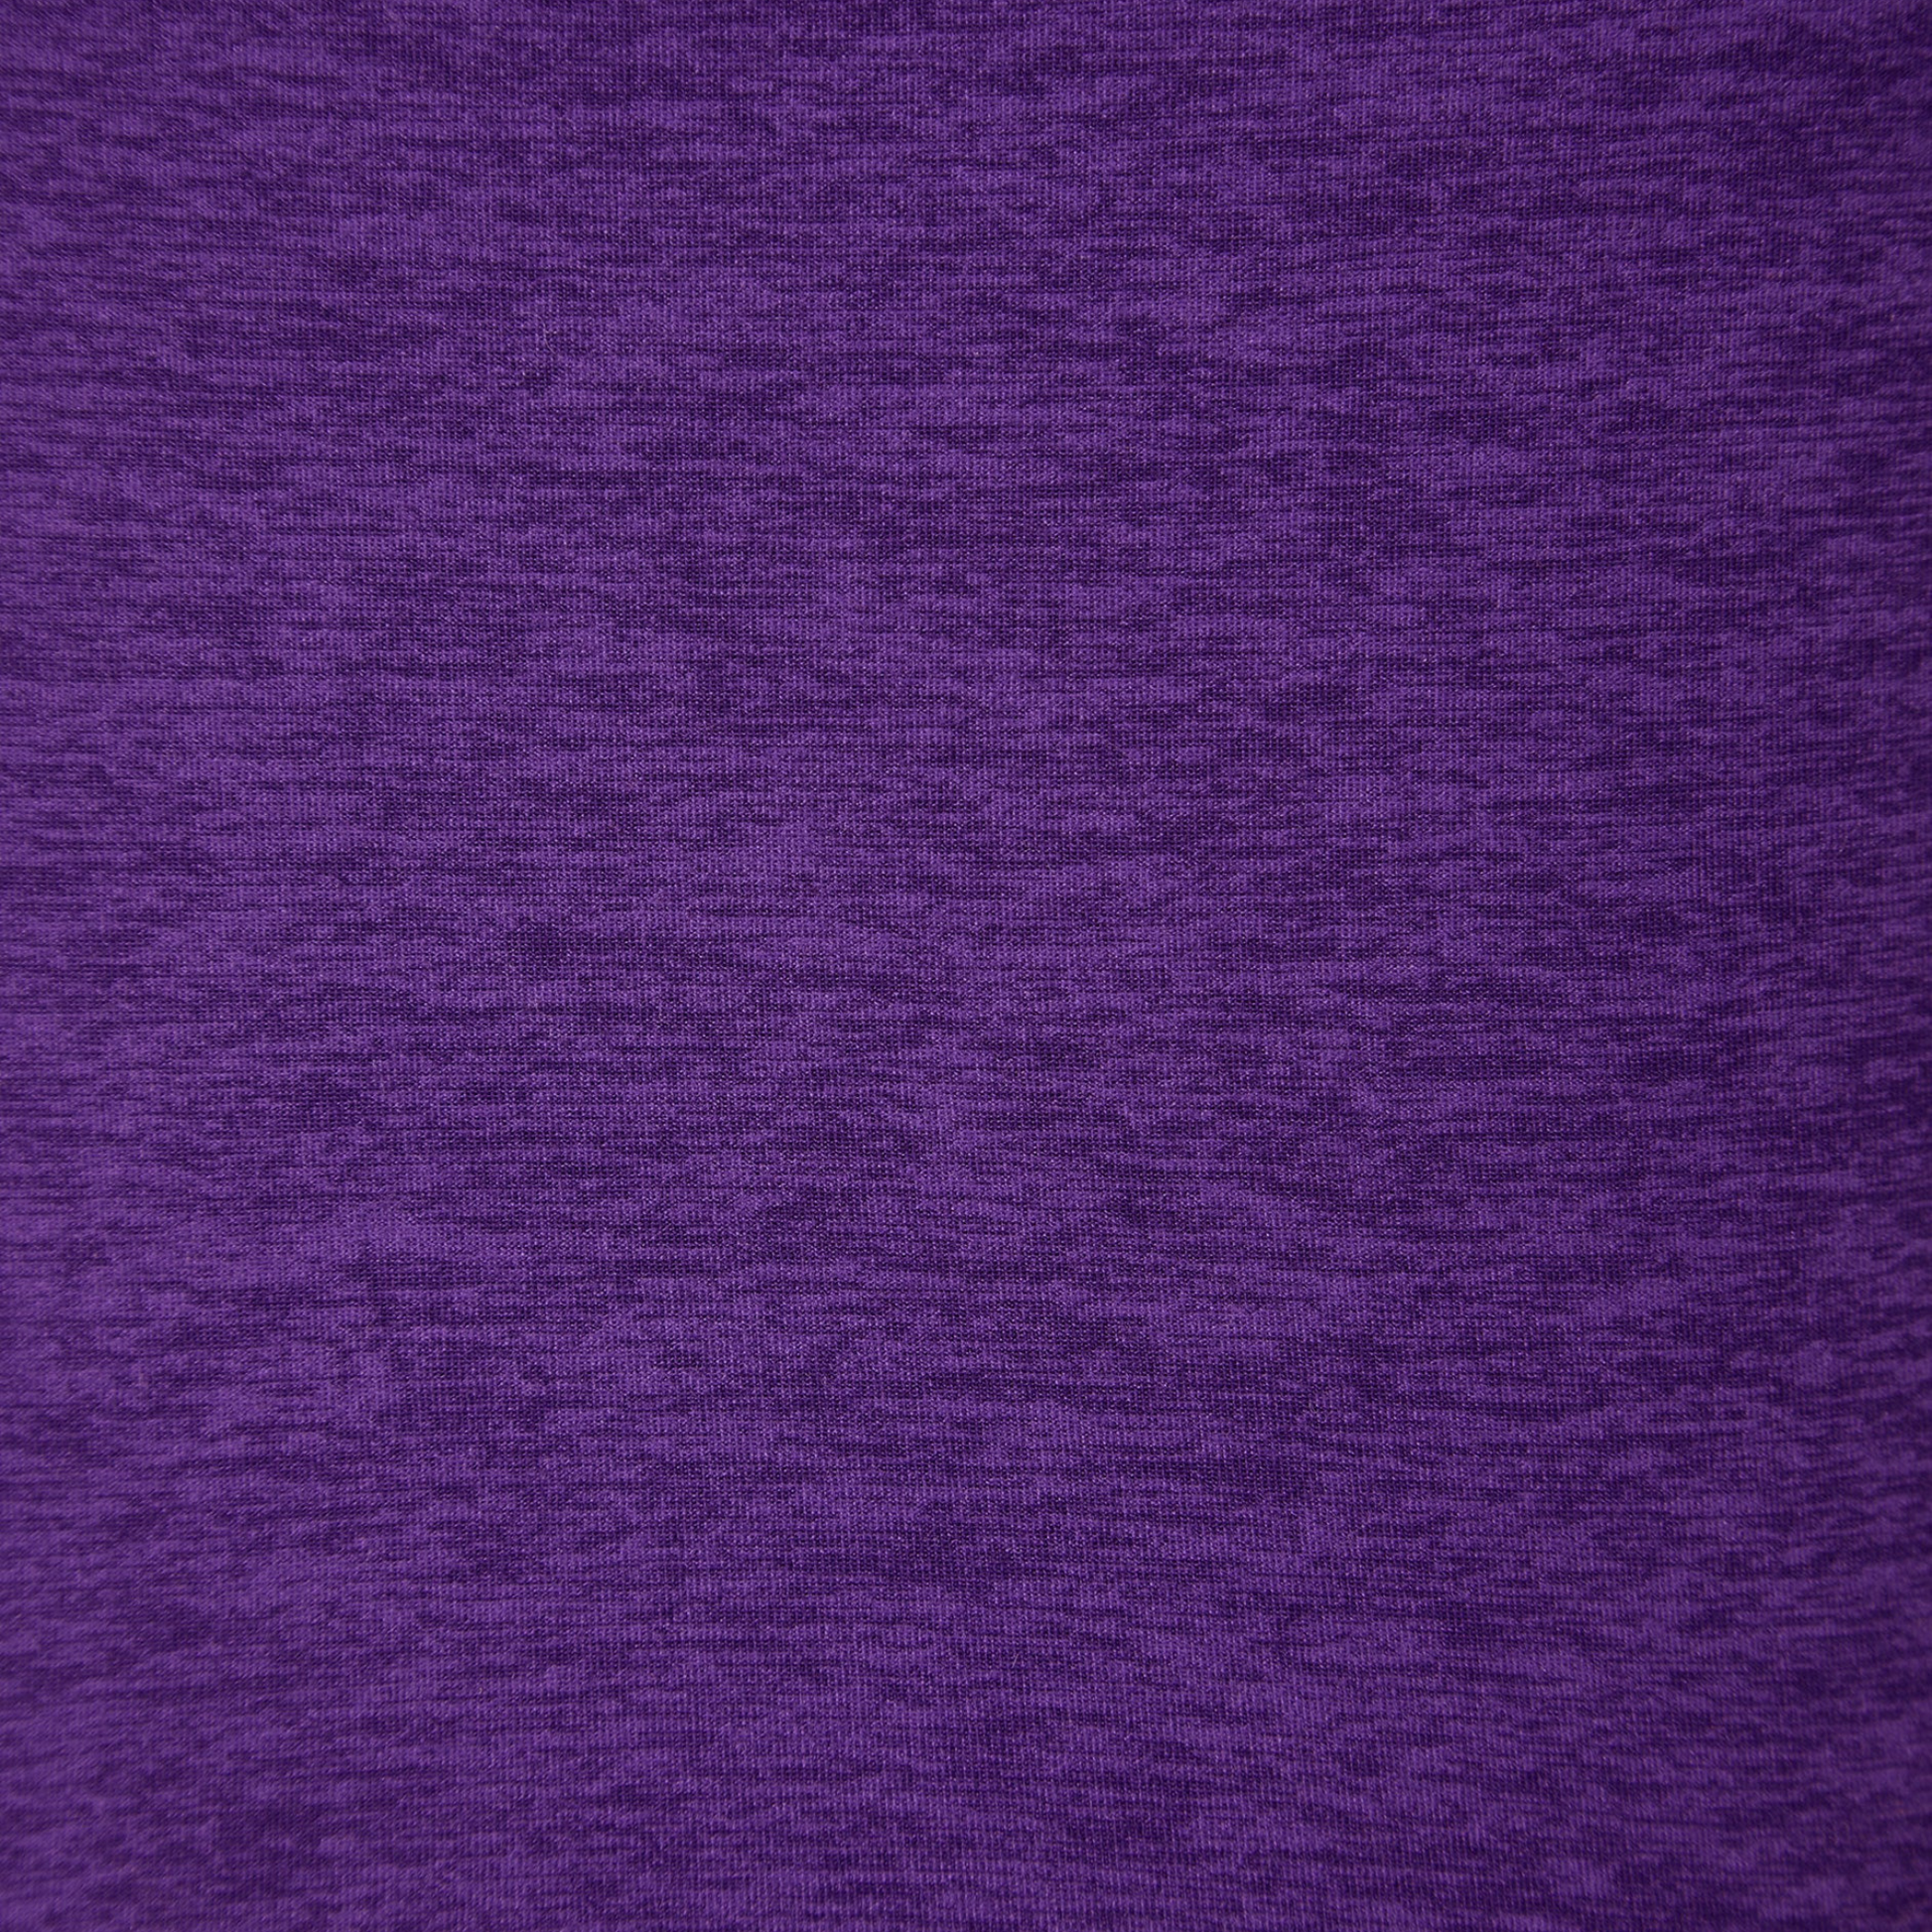 swatch of bright purple material